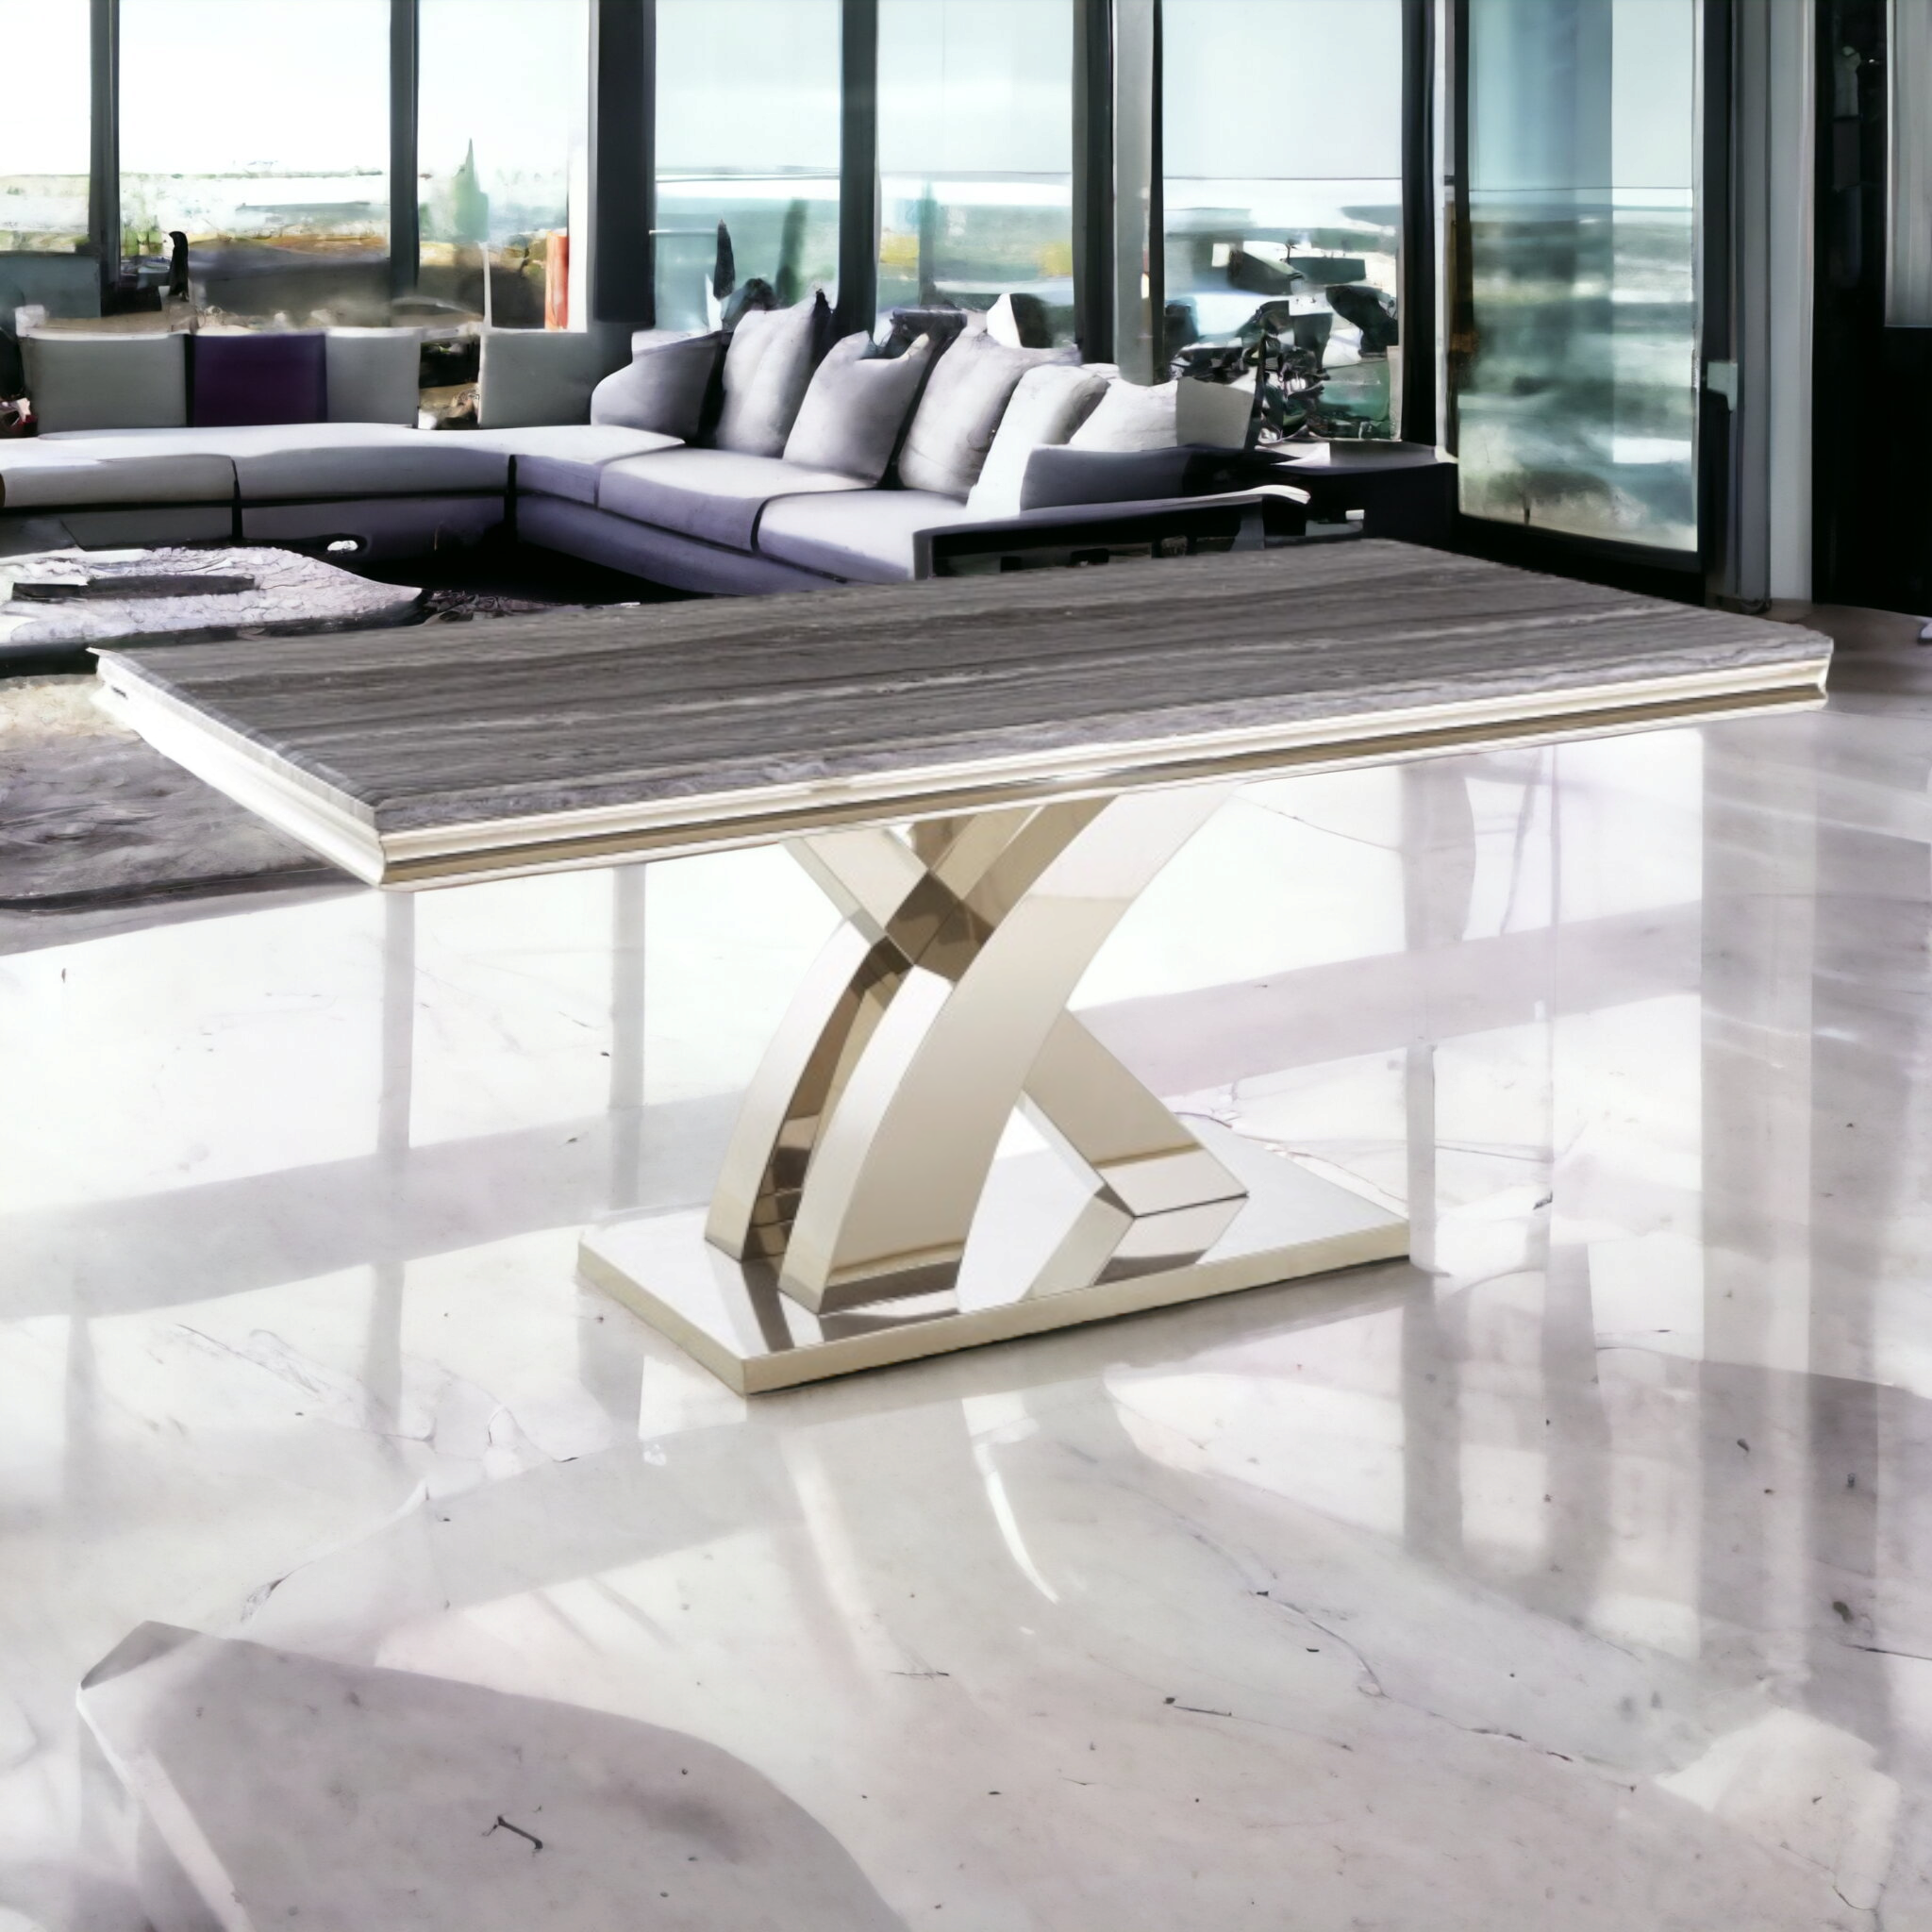 Mayfair Large Gray Marble Table